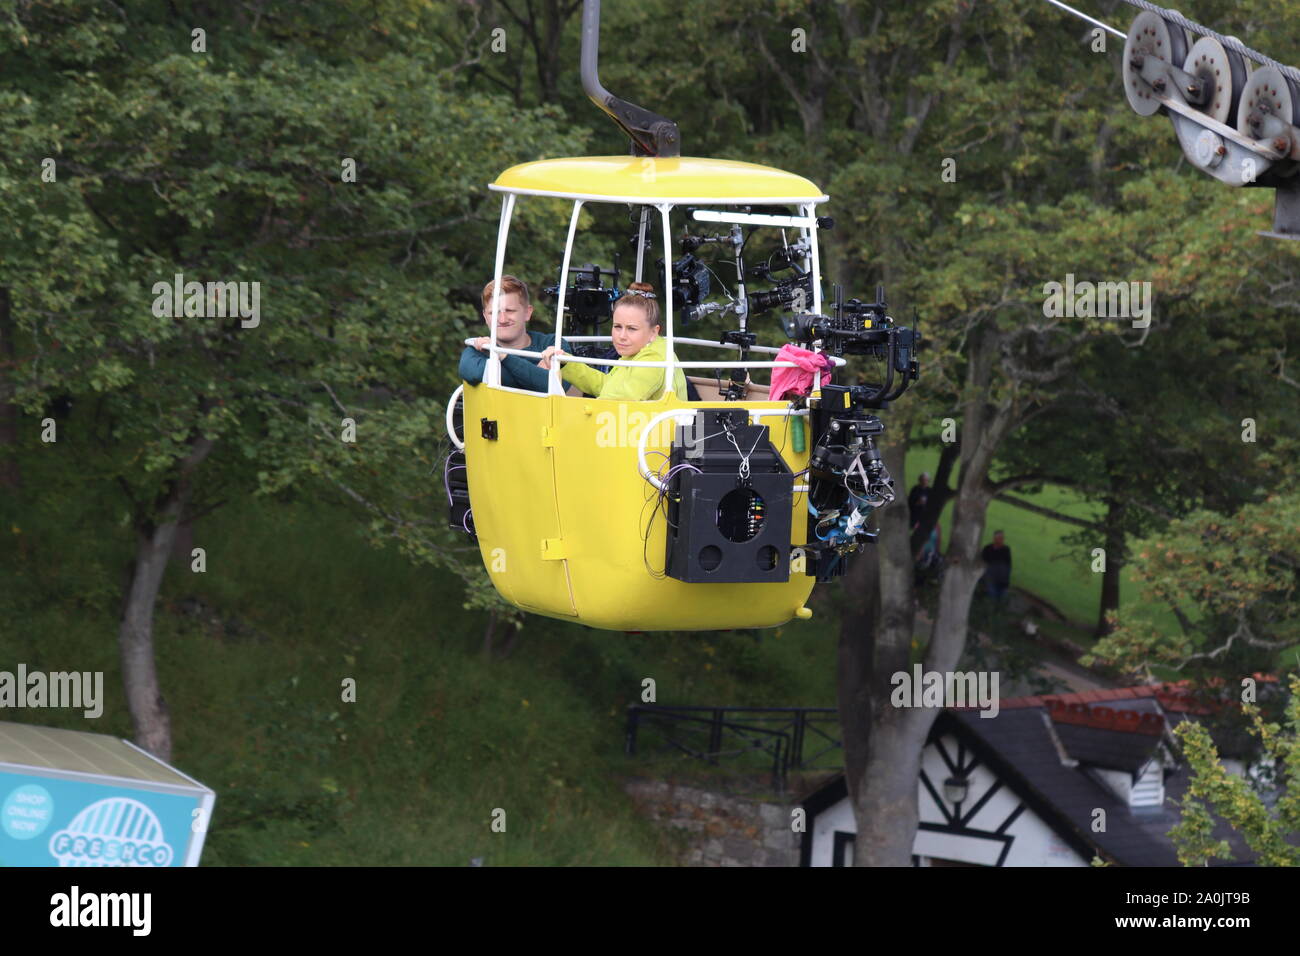 Coronation Street's Gemma Winter, played by Dolly-Rose Campbell, goes in to labour while  high above the ground in a cable car with Chesney Brown (Sam Aston) Featuring: Dolly-Rose Campbell, Sam Aston Where: Llandudno, United Kingdom When: 20 Aug 2019 Credit: WENN.com Stock Photo